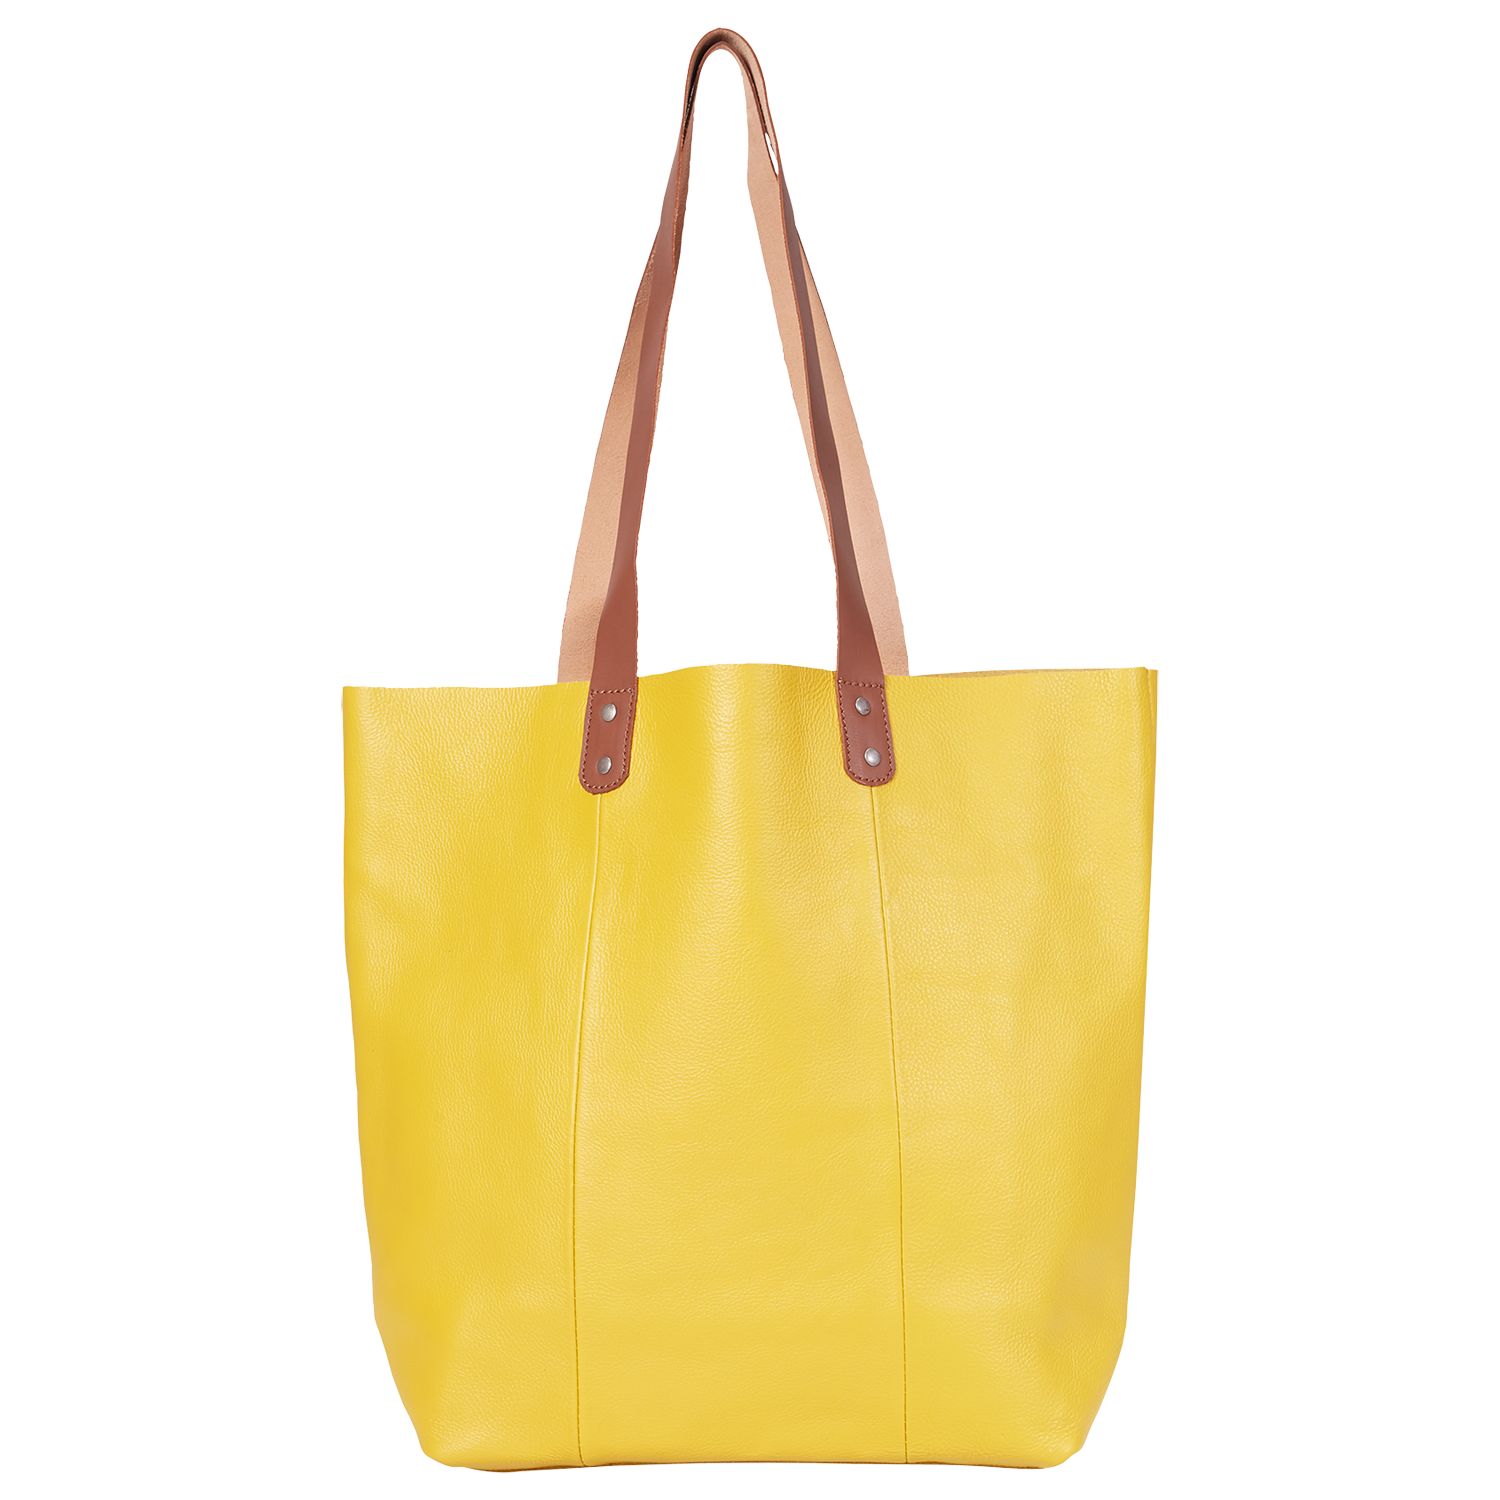 White Stuff Ginny Leather Tote Bag at John Lewis & Partners